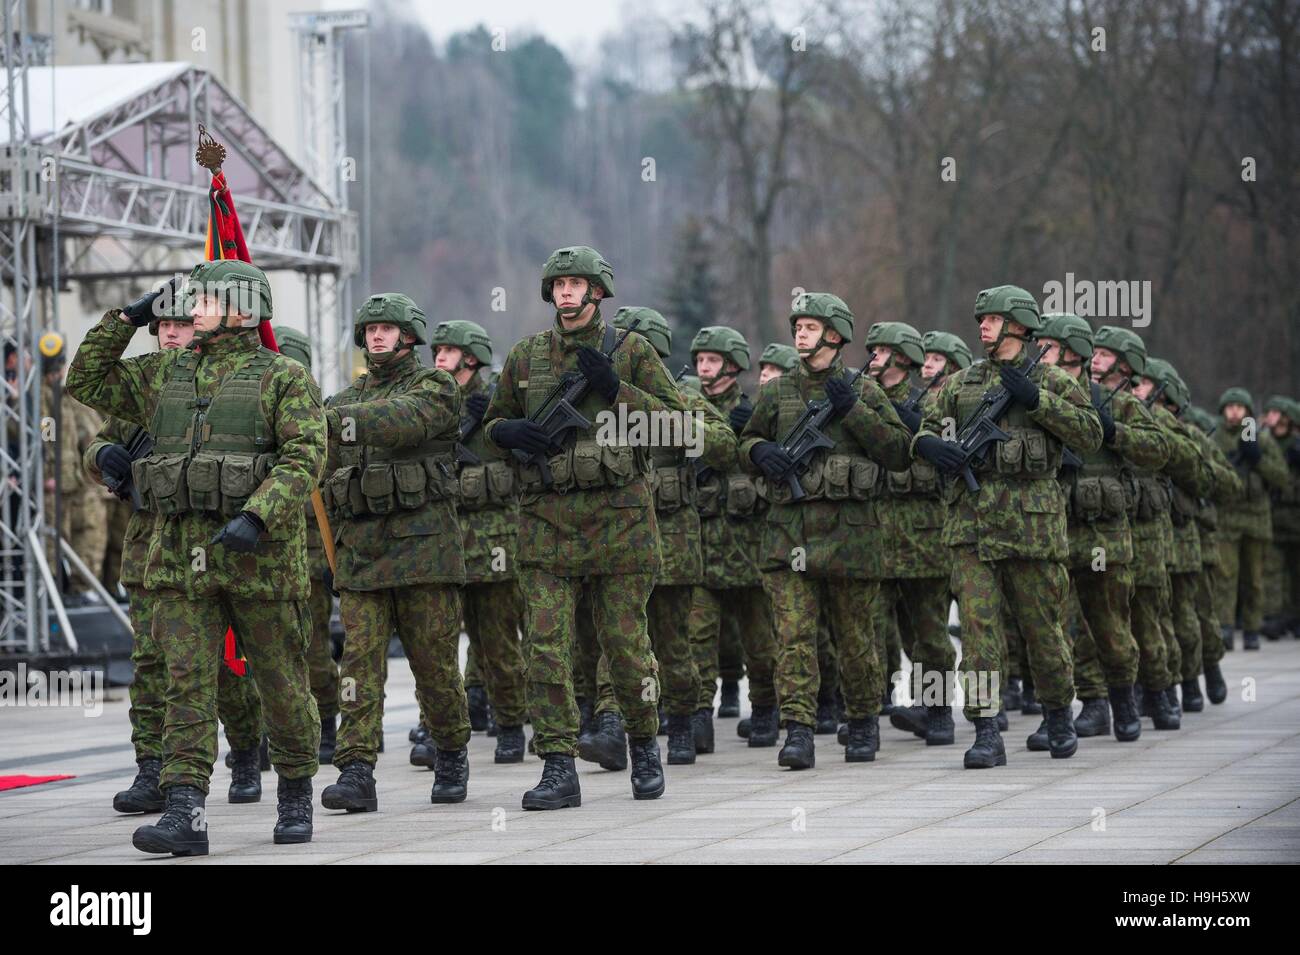 Vilnius, Lithuania. 23rd Nov, 2016. Members of Lithuanian armed forces attend the Lithuania's Armed Forces Day celebration in Vilnius, capital of Lithuania, on Nov. 23, 2016. Lithuanian armed forces and troops of some NATO member countries held a gala with formation on Wednesday to celebrate Lithuania's Armed Forces Day. The first decree on establishing armed forces was appoved on Nov. 23, 1918, which became the Armed Forces Day of the Baltic country. © Alfredas Pliadis/Xinhua/Alamy Live News Stock Photo